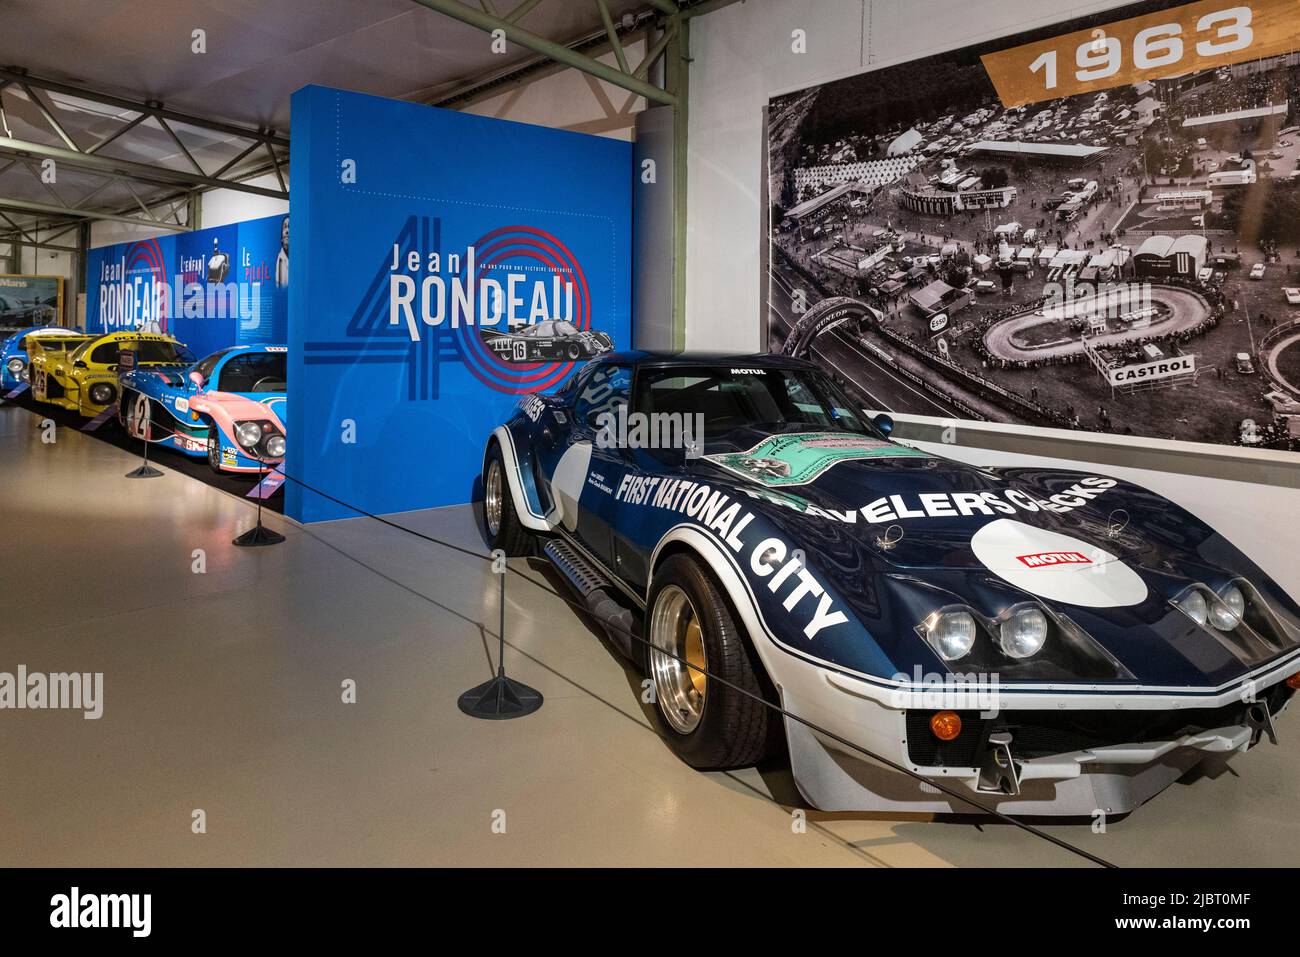 France, Sarthe, Le Mans, the automobile museum of Sarthe, Museum of the 24 hours of Le Mans, Chevrolet Corvette C3 which participated 6 times in the 24 hours of Le Mans in the 70s Stock Photo